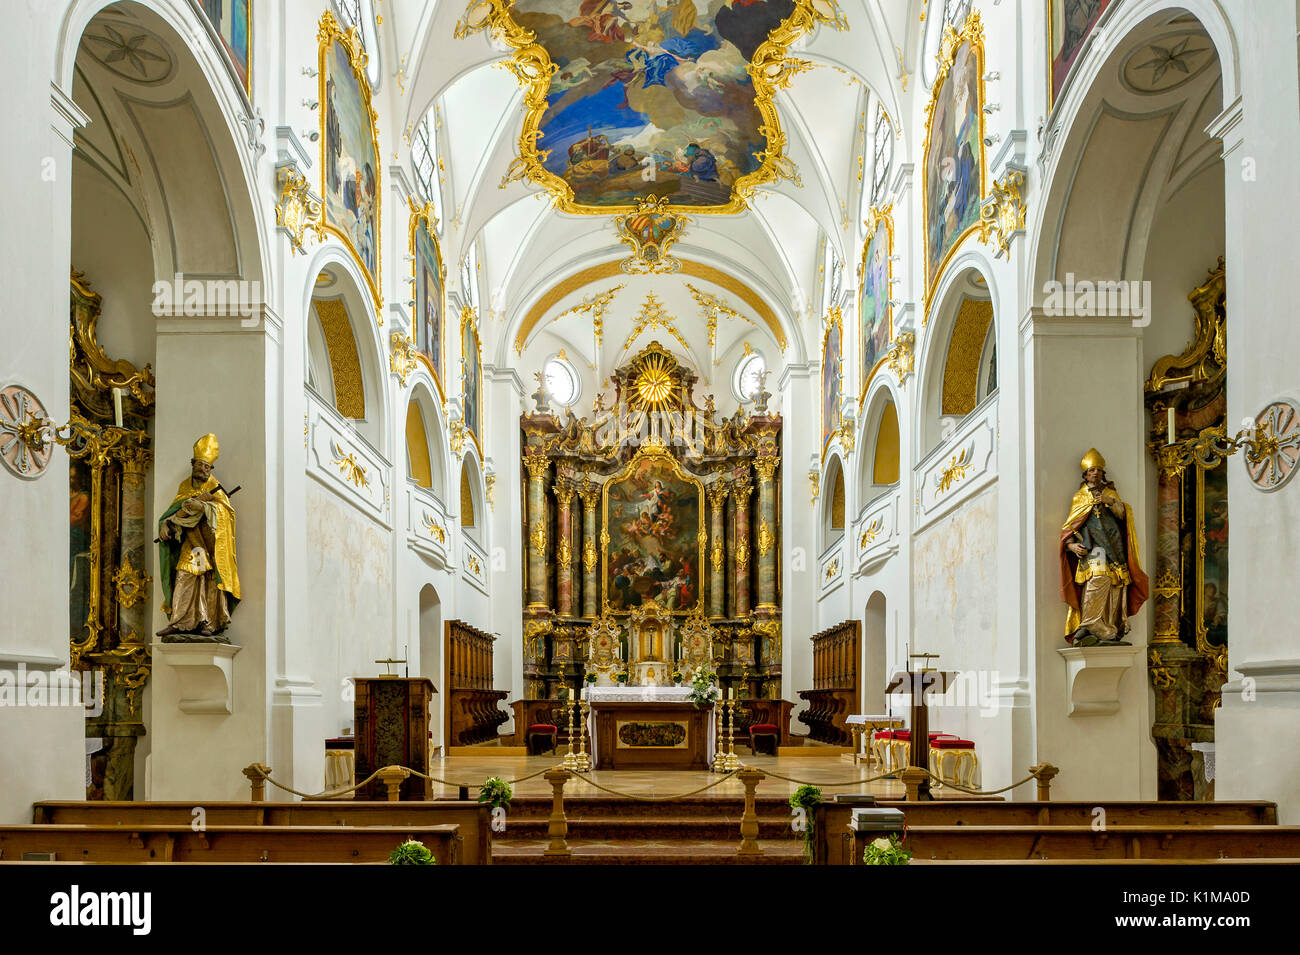 Nave with pulpit and choir, Basilica of the Holy Cross, Cloister Scheyern, Benedictine abbey, district Pfaffenhofen an der Ilm Stock Photo